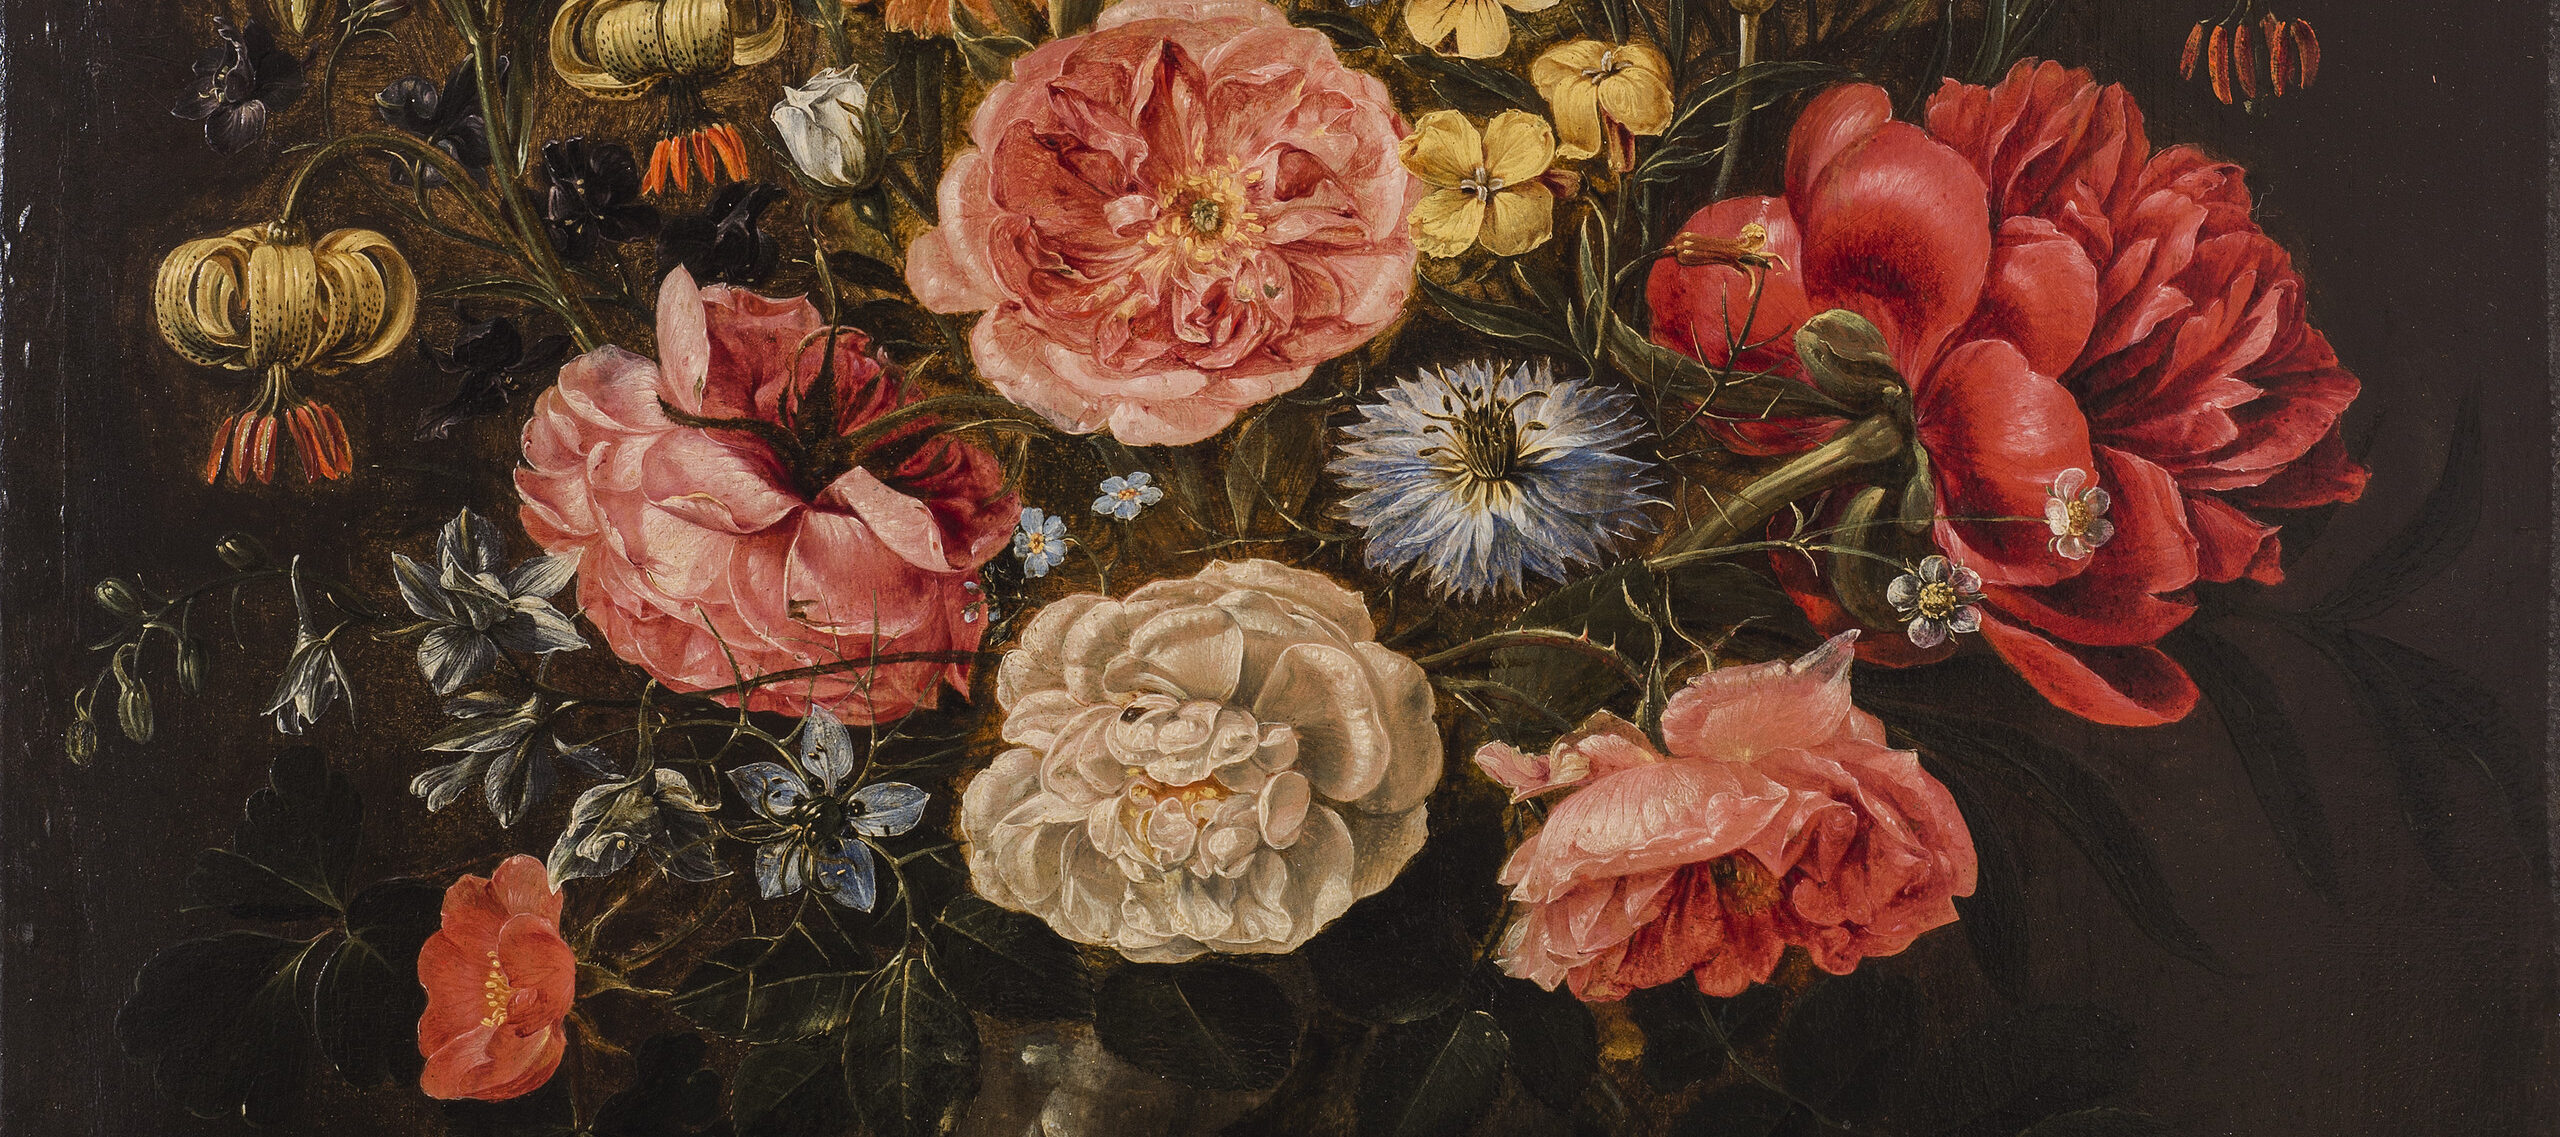 Realistic and detailed, the still life painting meticulously renders a variety of brightly colored flowers densely arranged in a dark round vase set against a dark background. The vase sits upon a stone ledge with two stray pink roses laying in the foreground.